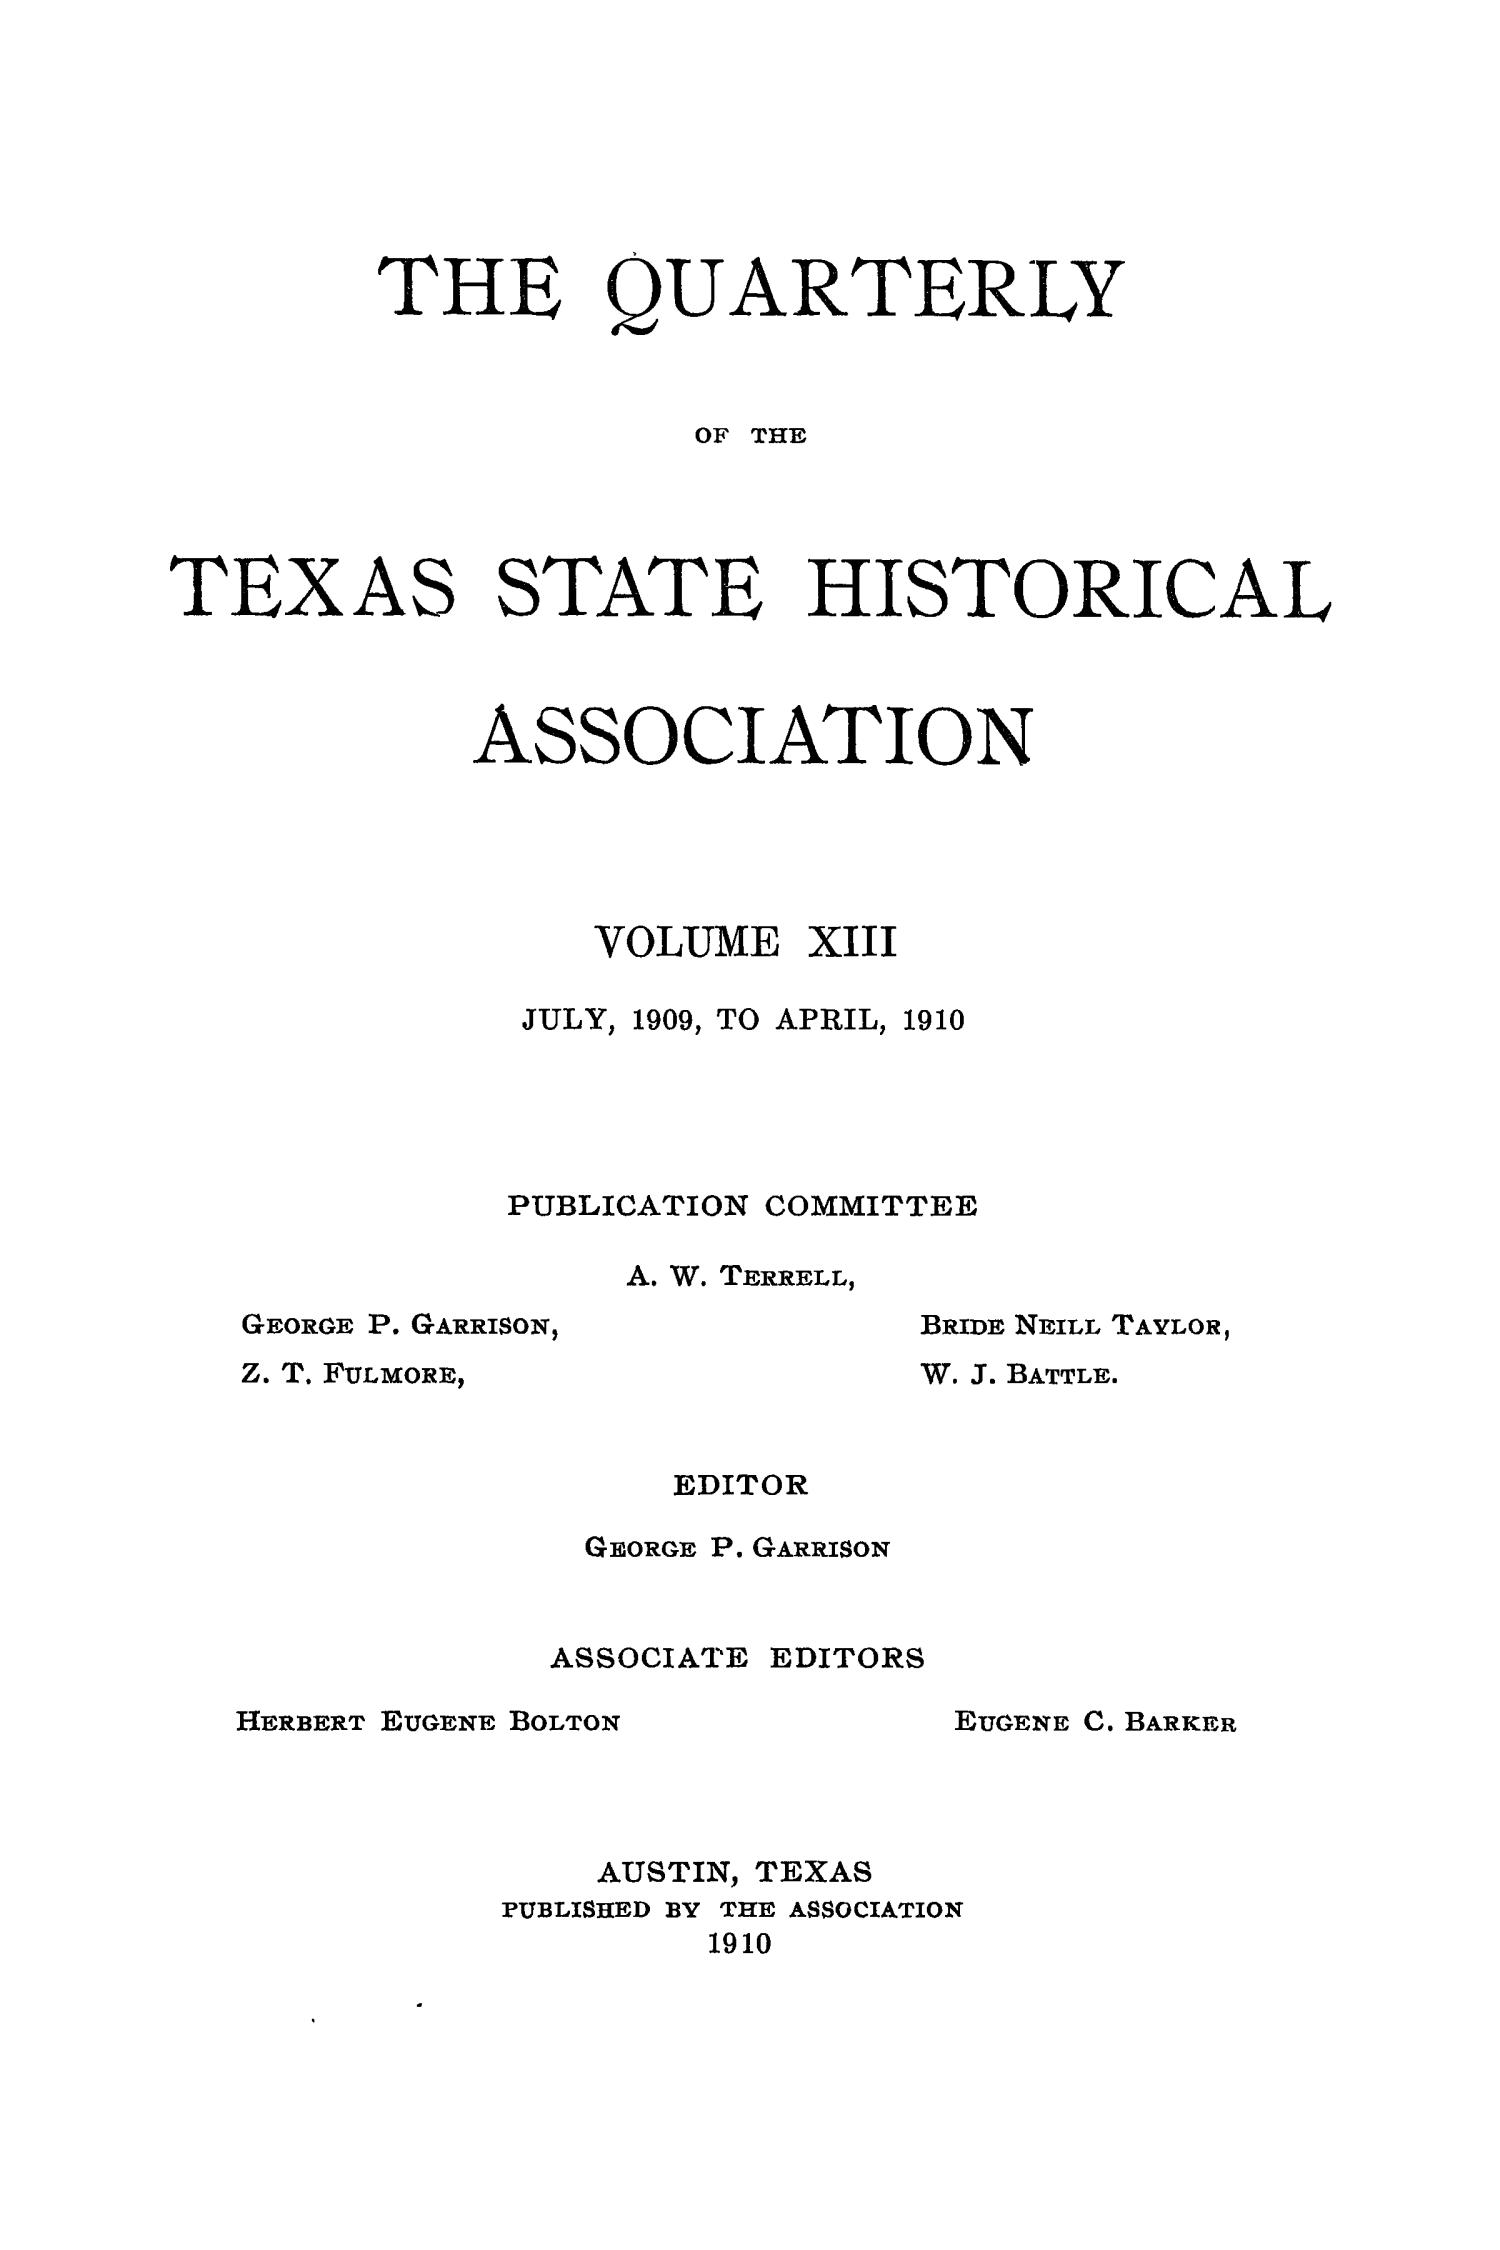 The Quarterly of the Texas State Historical Association, Volume 13, July 1909 - April, 1910
                                                
                                                    Front Cover
                                                